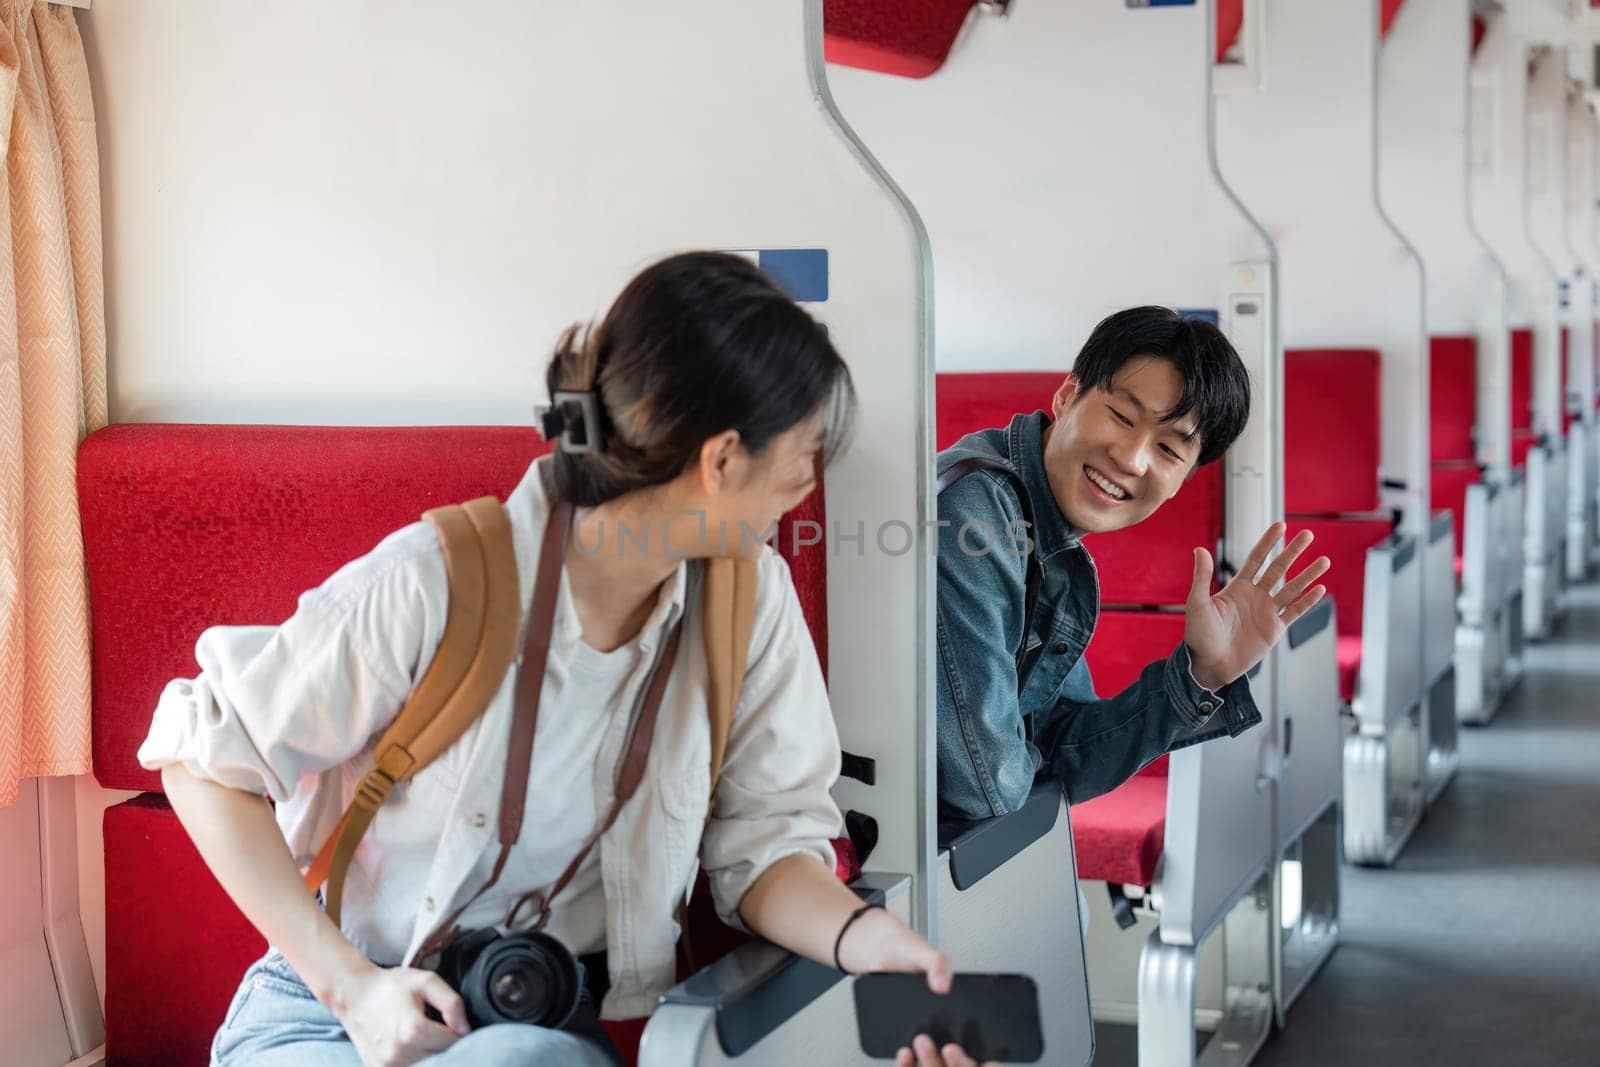 friendly and young Asian male traveler waves his hand, greeting a new friend during the trip on a train. Friendship and traveling concepts by nateemee